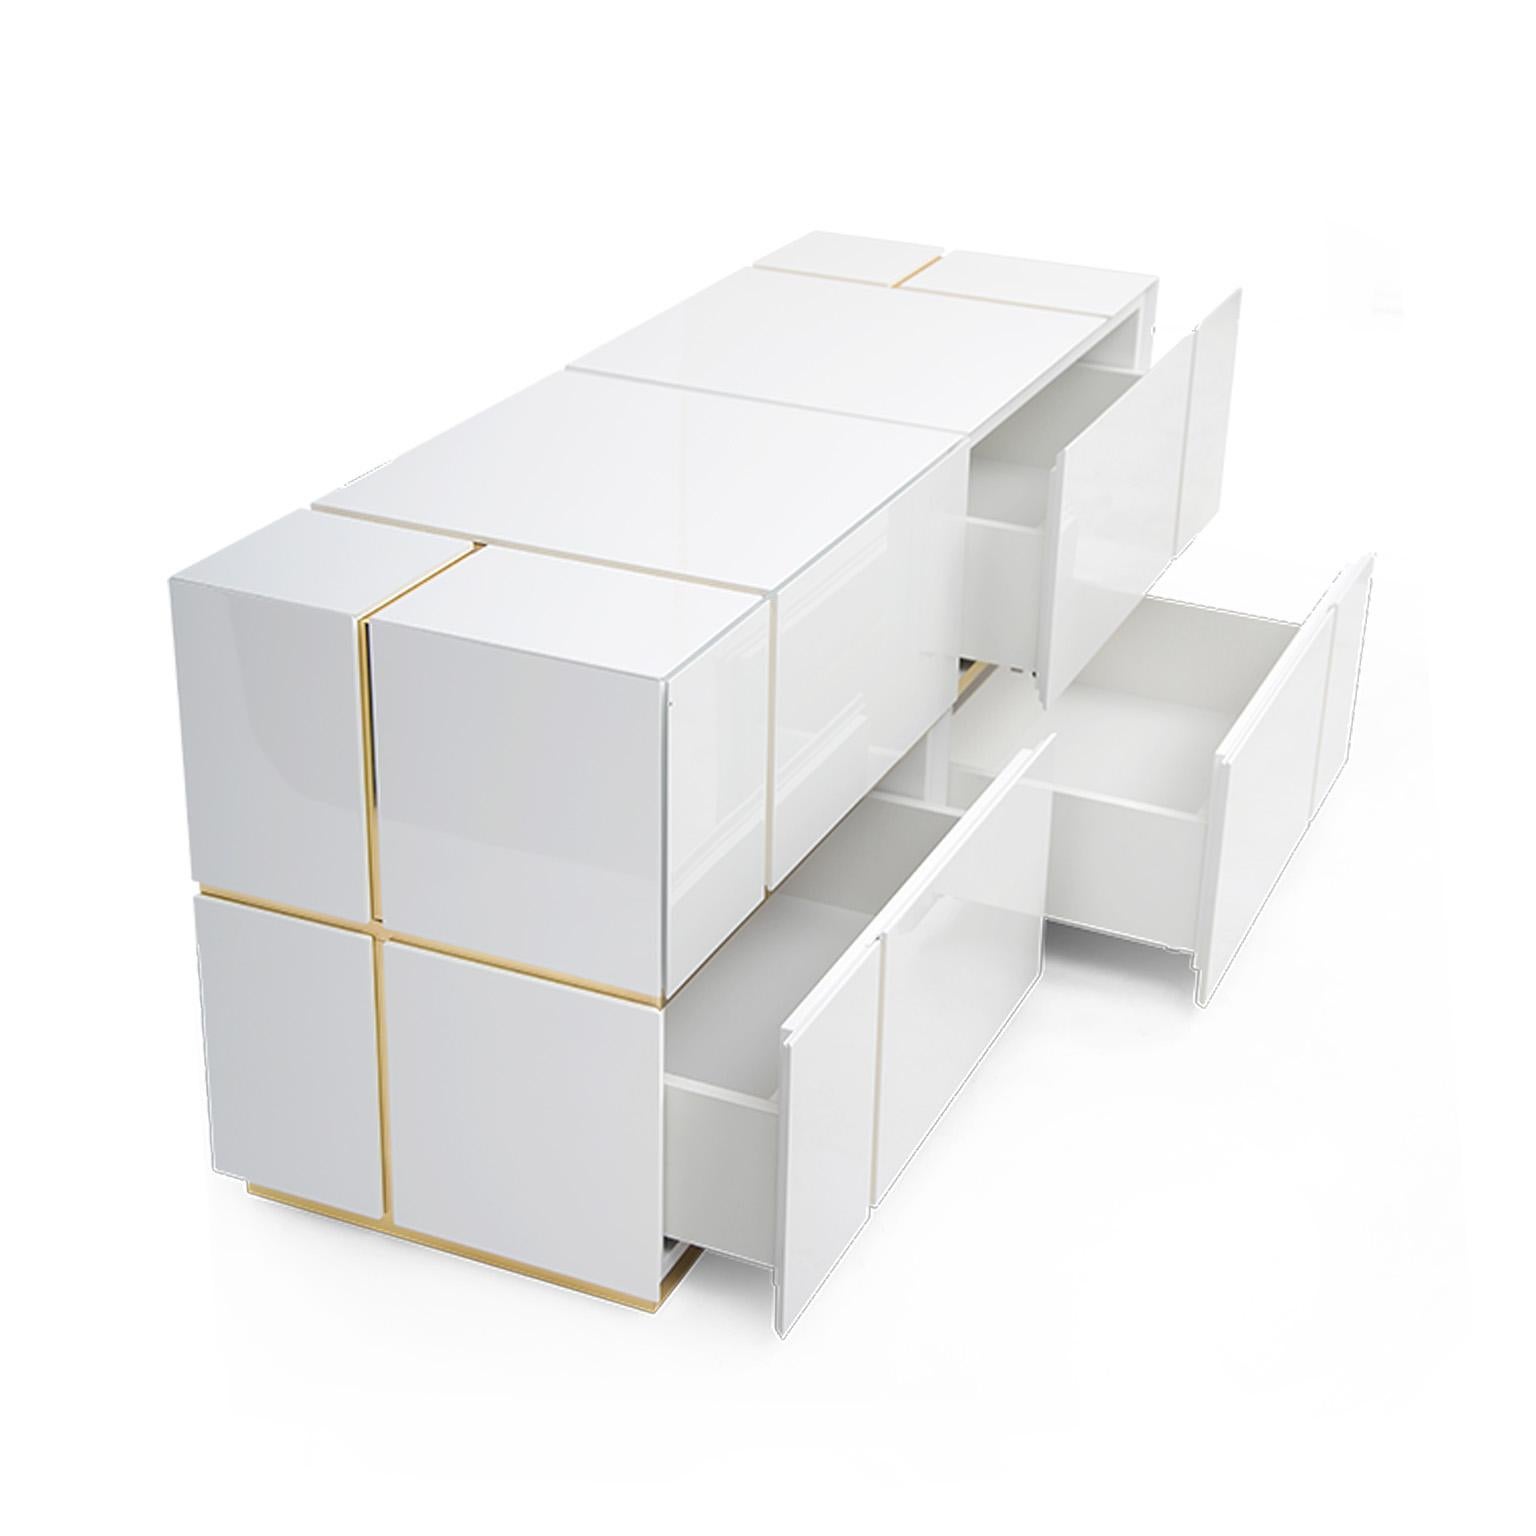 This modern set of 2 bedside tables diamond gently fit the bedroom atmosphere by contrasting white and brass. The handcrafted construction has a high gloss white finish and brass details. Made of wood, plywood and brass, bedside tables Diamond